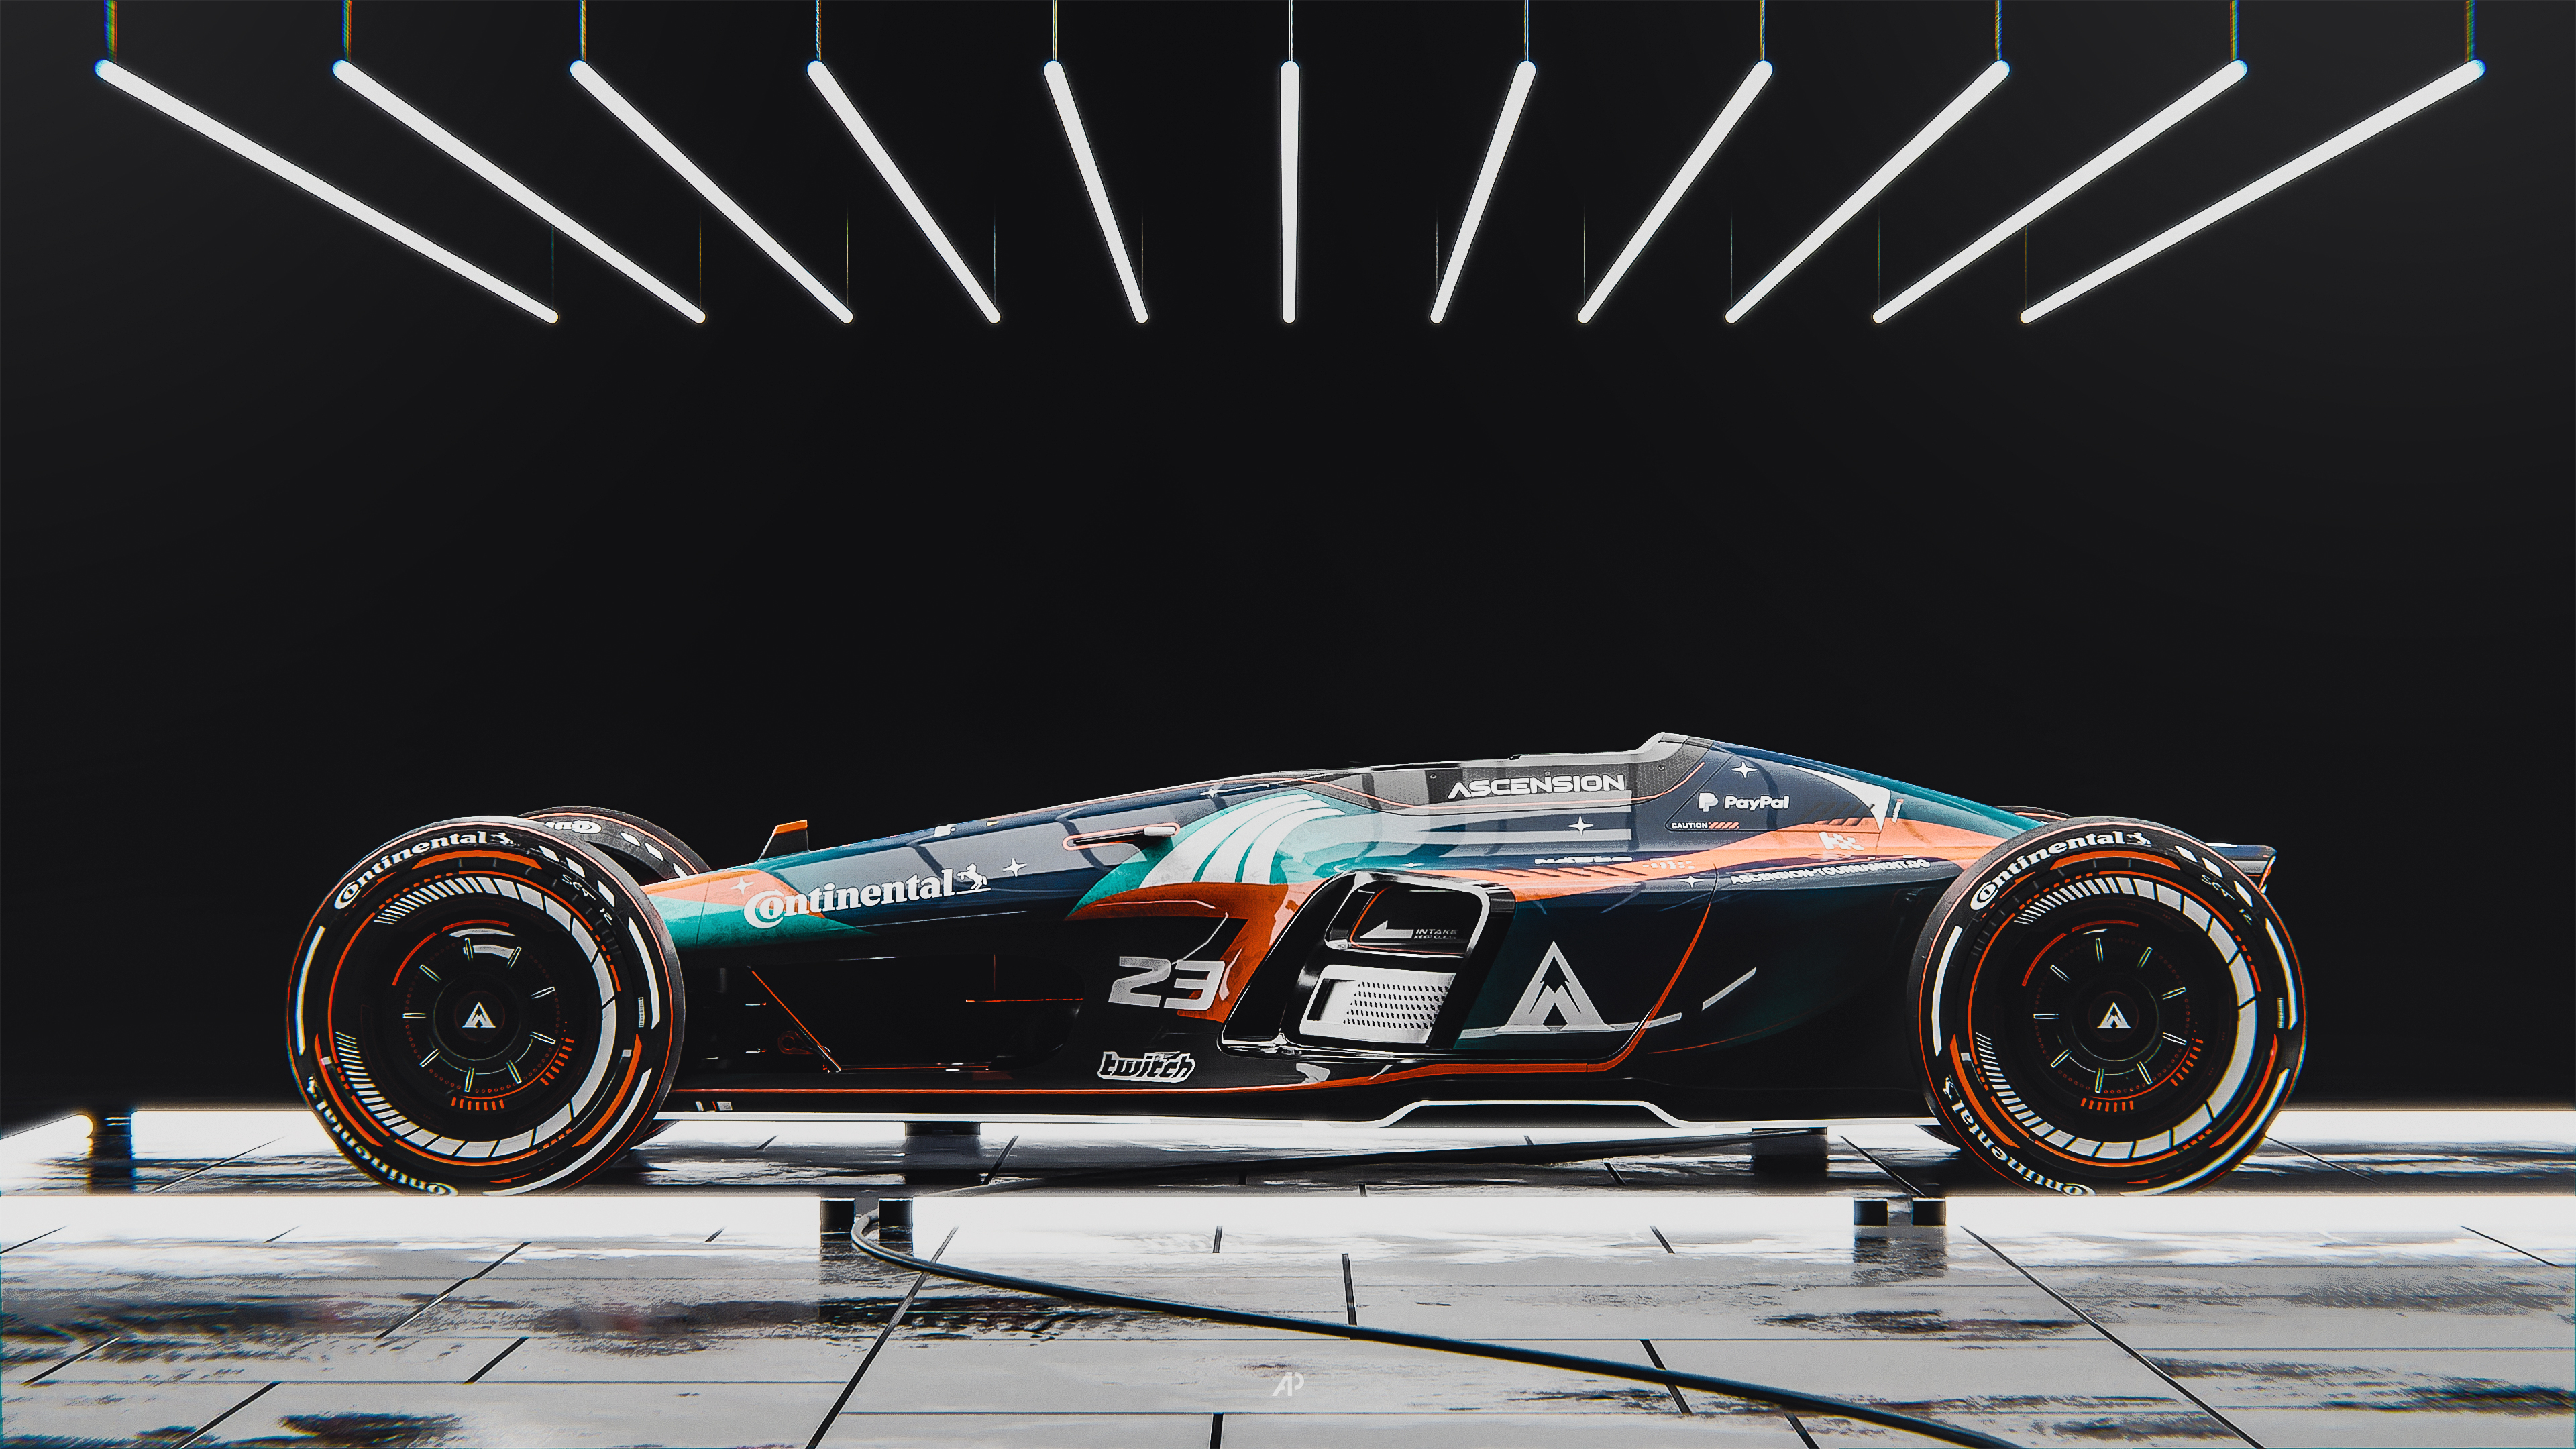 Official TrackMania skin livery of the Ascension 2023, the biggest TrackMania event ever